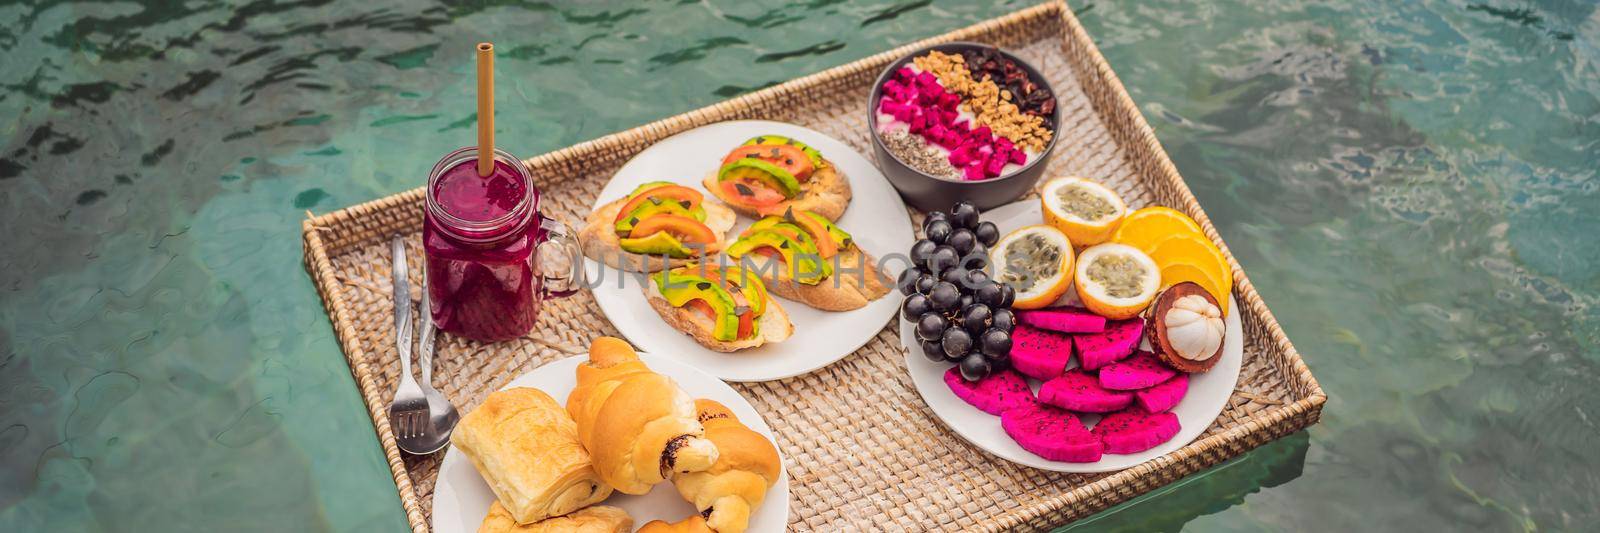 BANNER, LONG FORMAT Breakfast tray in swimming pool, floating breakfast in luxury hotel smoothies and fruit plate, smoothie bowl by the hotel pool. Exotic summer diet. Tropical beach lifestyle. Bali Trend by galitskaya